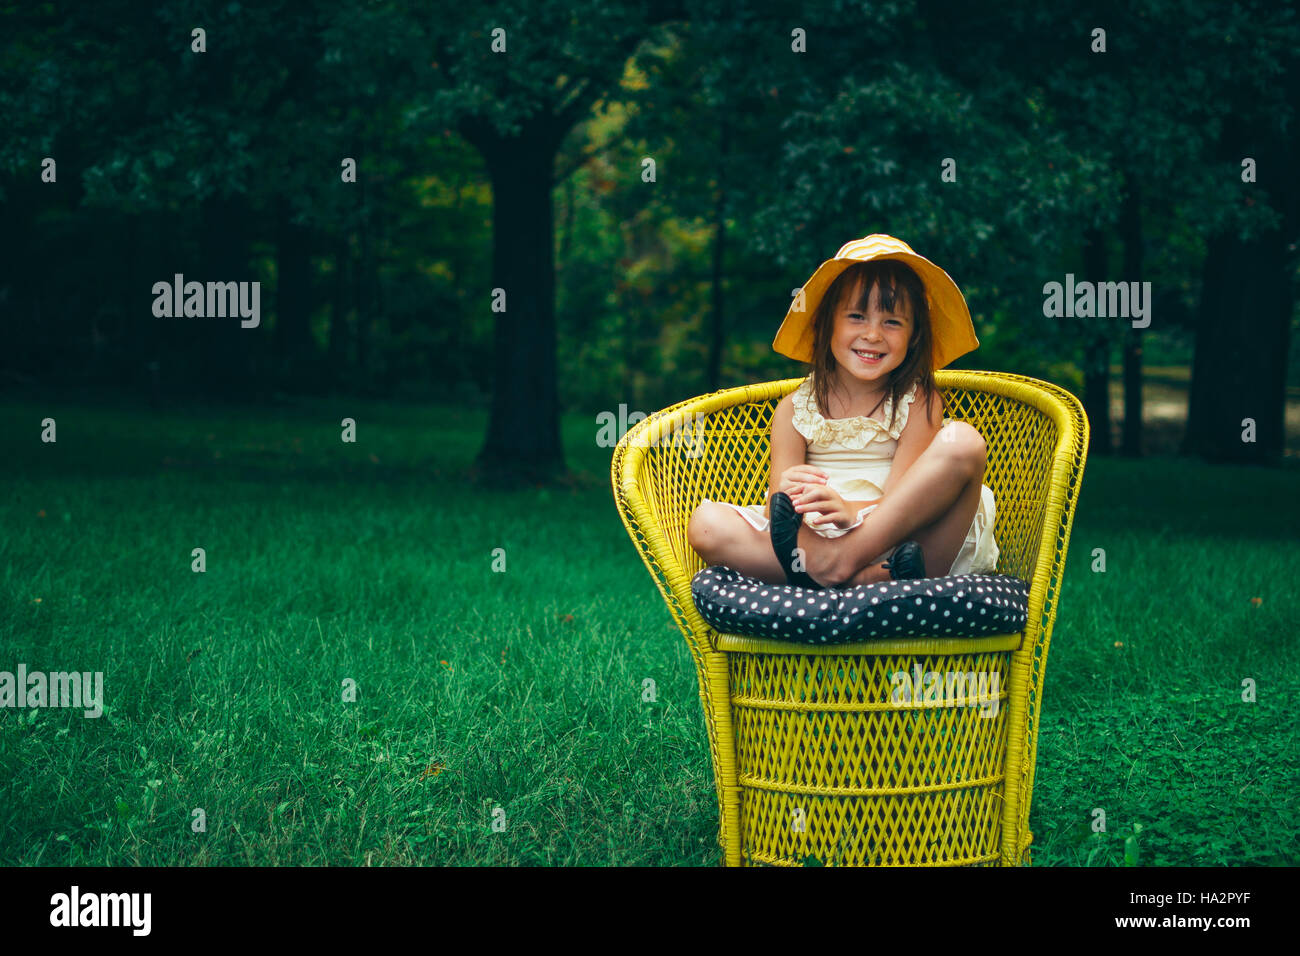 Portrait of a smiling girl sitting in a garden chair Stock Photo